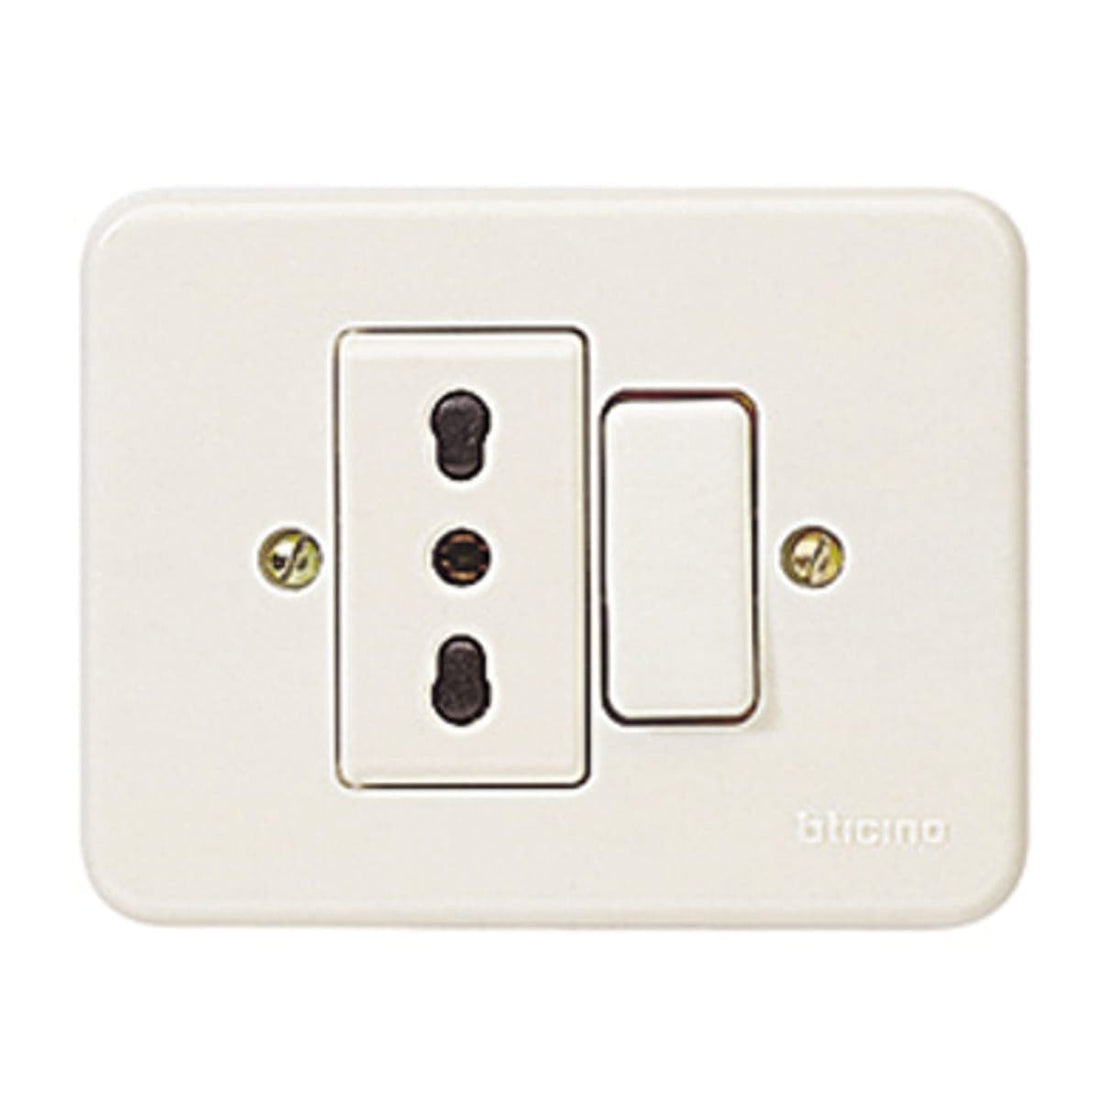 DOMINO 2-SEATER MONOBLOC PLATE WITH DIVERTER AND SOCKET - best price from Maltashopper.com BR420100026